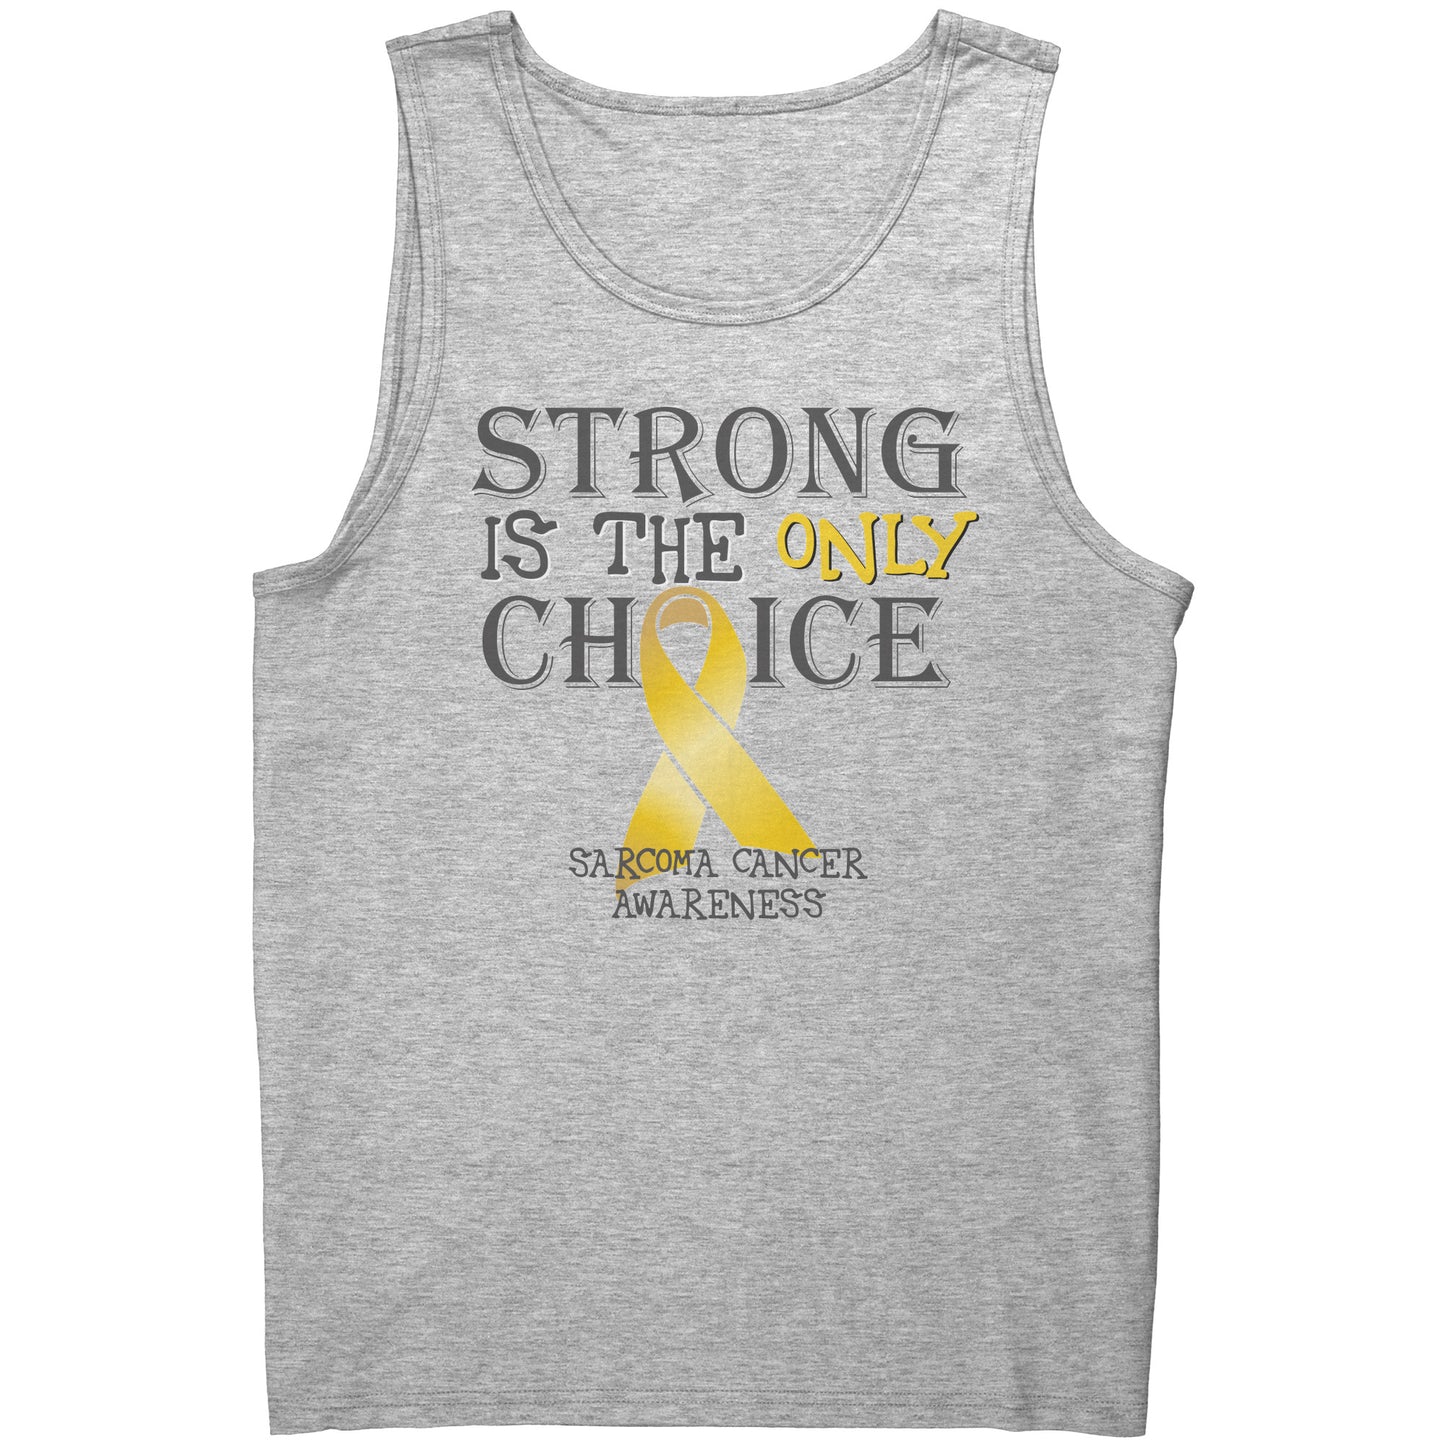 Strong is the Only Choice -Sarcoma Cancer Awareness T-Shirt, Hoodie, Tank